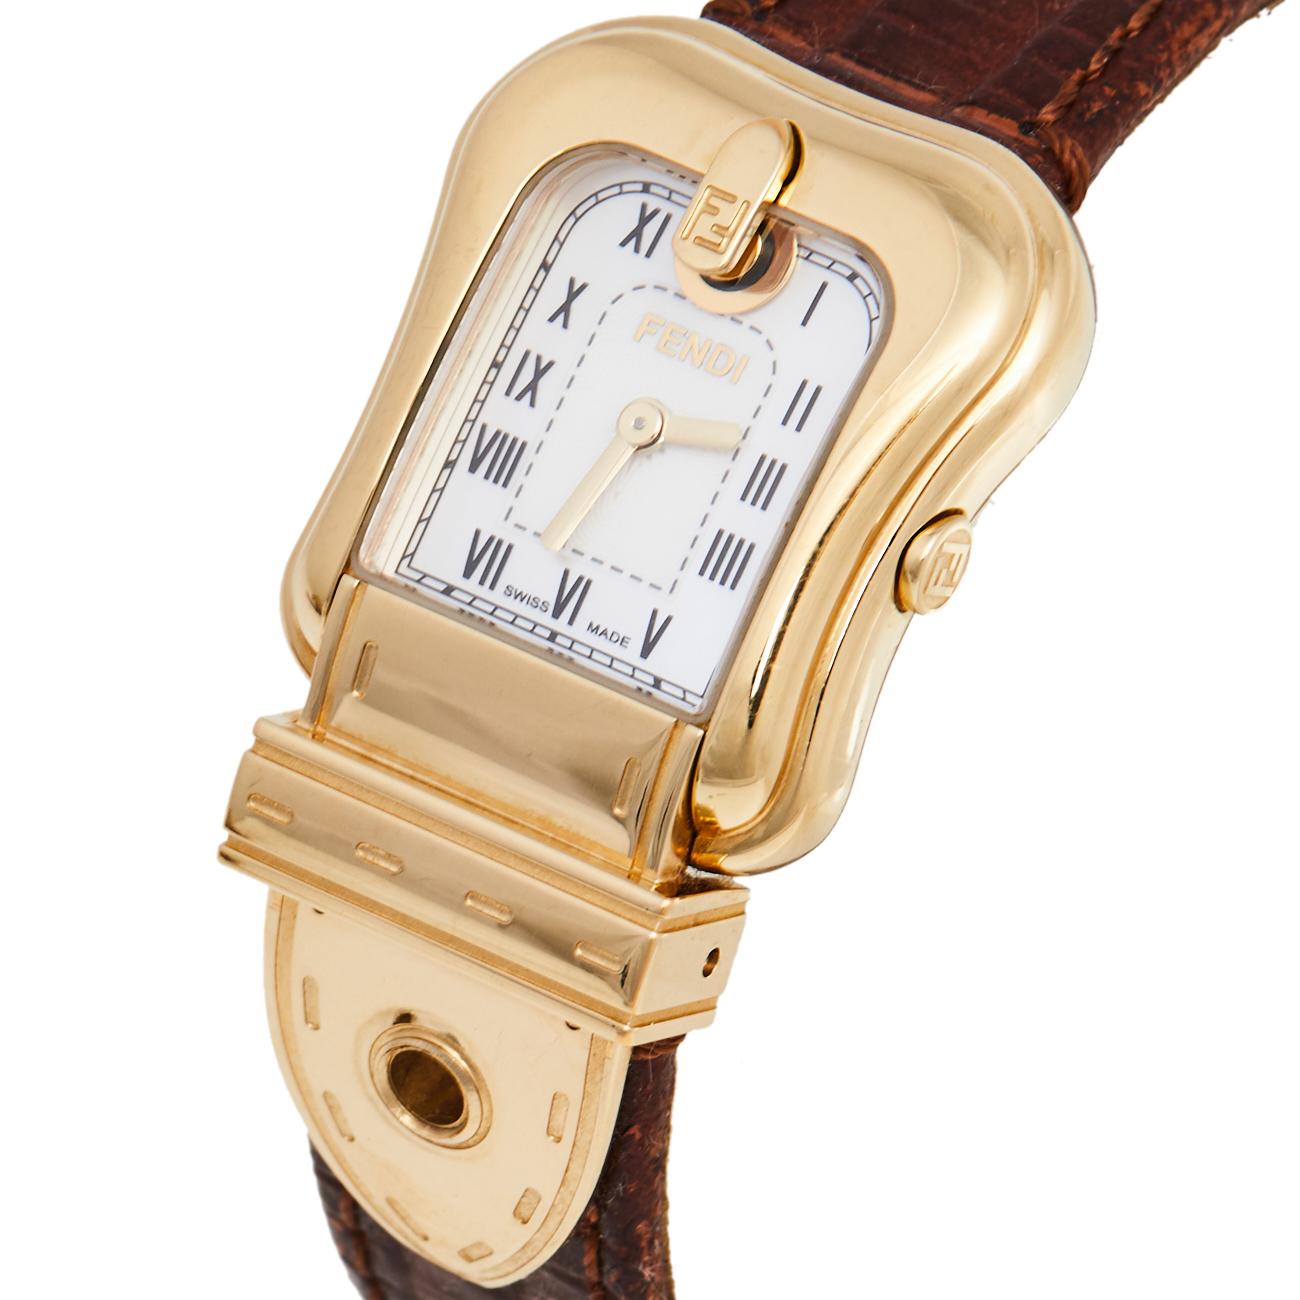 Swiss-made and created from gold-plated stainless steel, this Fendi watch flaunts a buckle-like case with Selleria stitch detailing. It has a Mother of Pearl dial set with Roman numeral hour markers and two hands, a smooth bezel, and an elegant